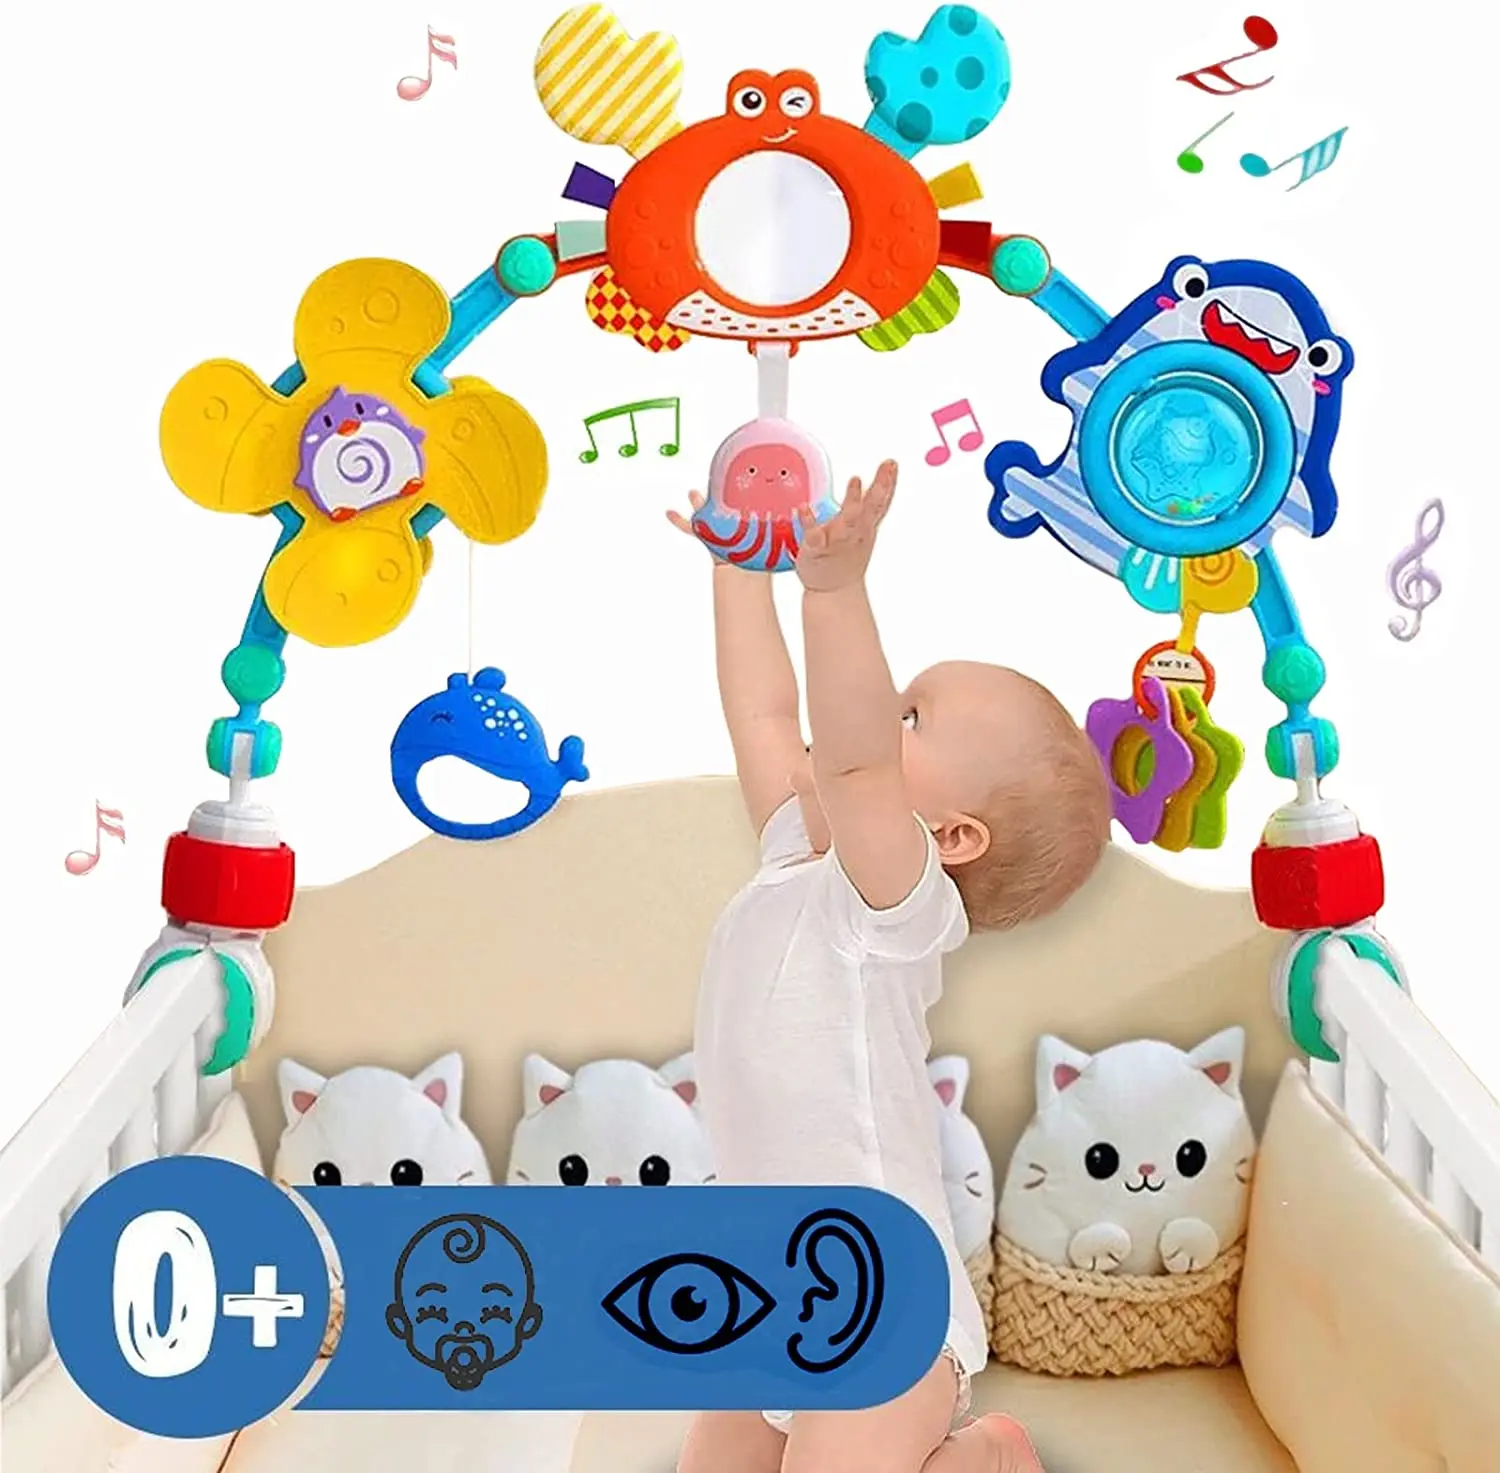 

Montessori Baby Stroller Toy Newborn Sensory Toys Crib Mobile On The Bed Baby Toy 0 12 Month Rattles for Baby Development Toy